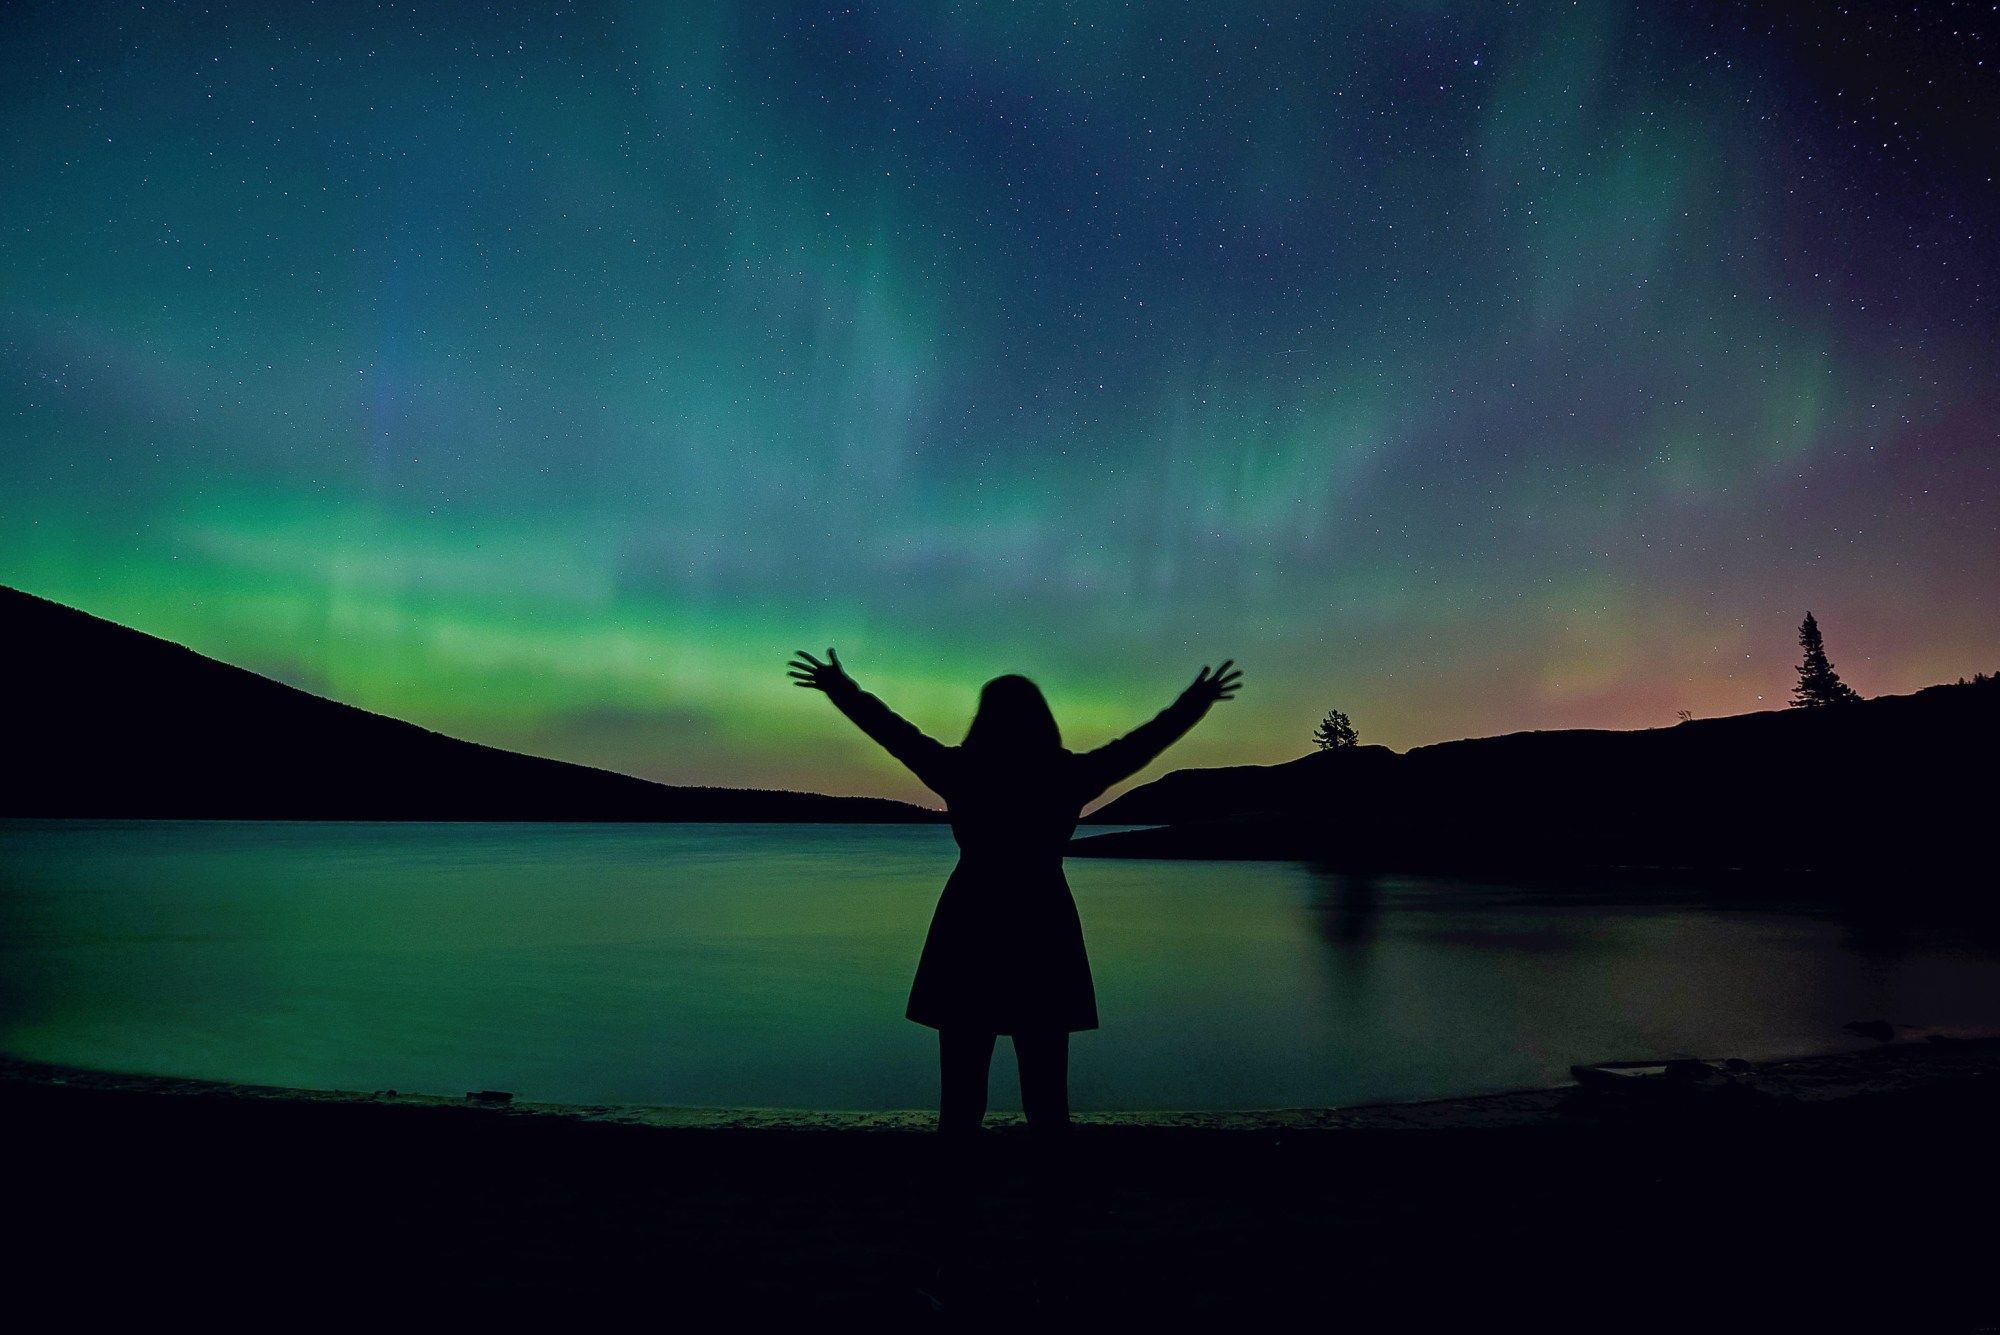 A woman reaches joyfully toward an aurora-lit night sky, her fingers spread wide. Green light shines above the horizon on the left, and orange light above the horizon on the right. over her head the sky has dancing green streaks. All the light is reflected in a lake at her feet.